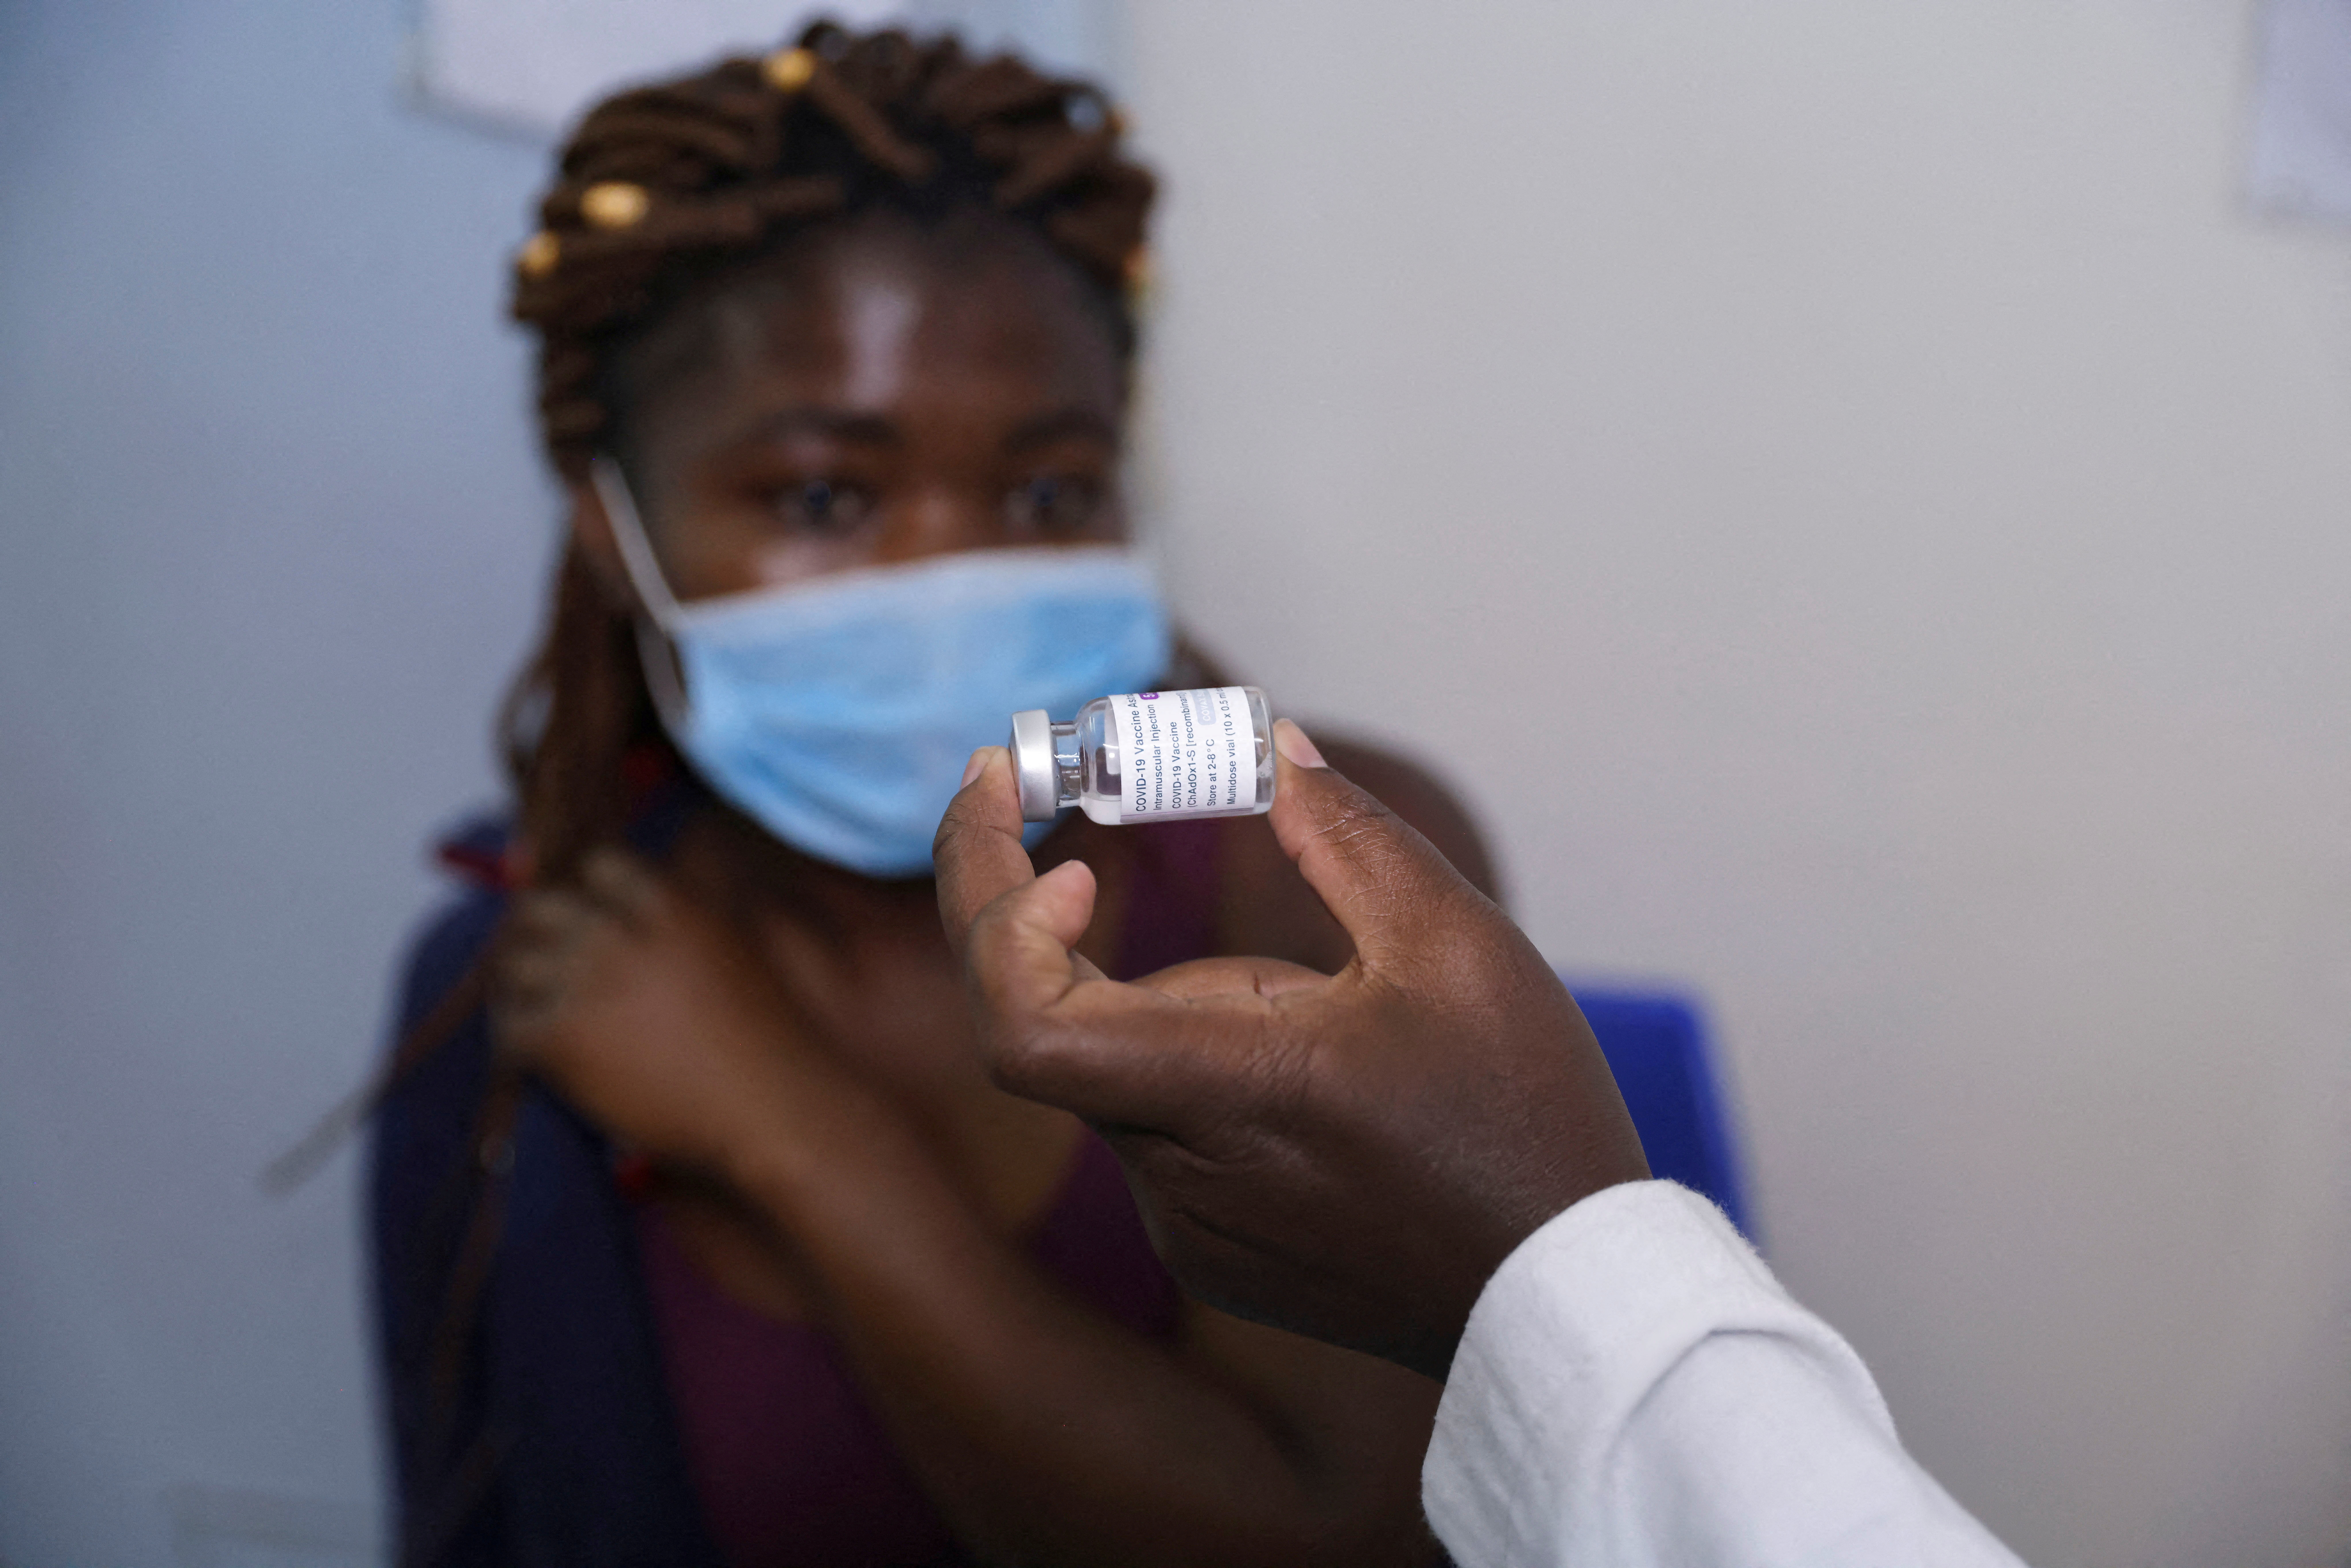 A health worker shows a woman a vial containing a COVID-19 vaccine before administering it to her, at the Penda health center in Nairobi